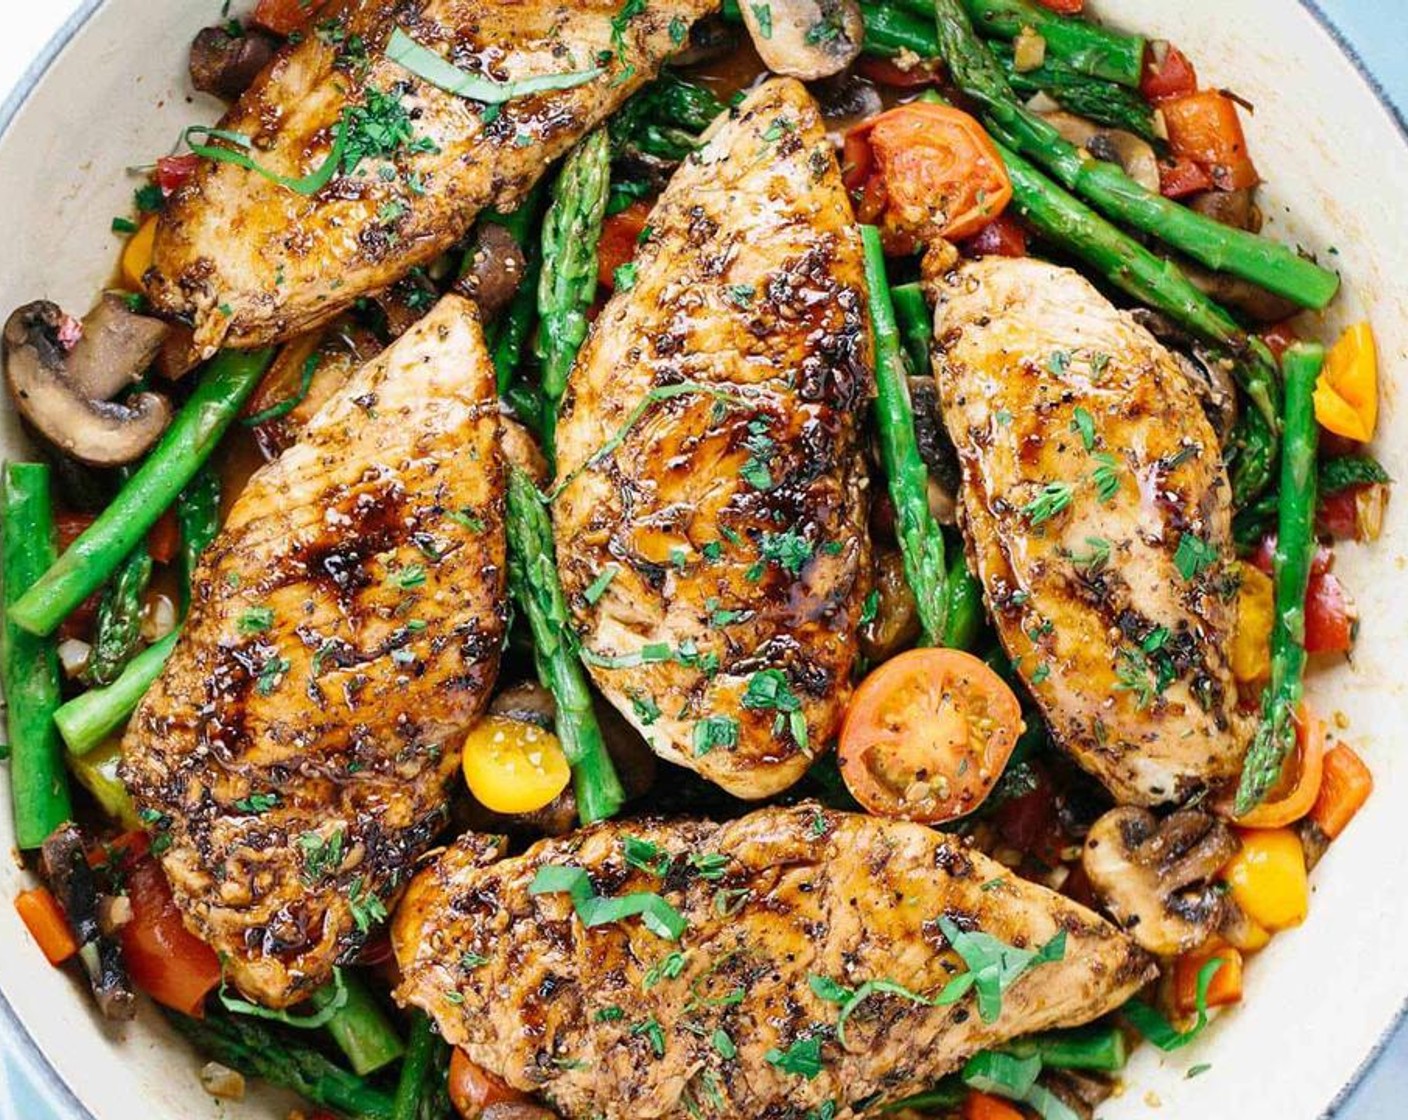 Balsamic Chicken and Asparagus